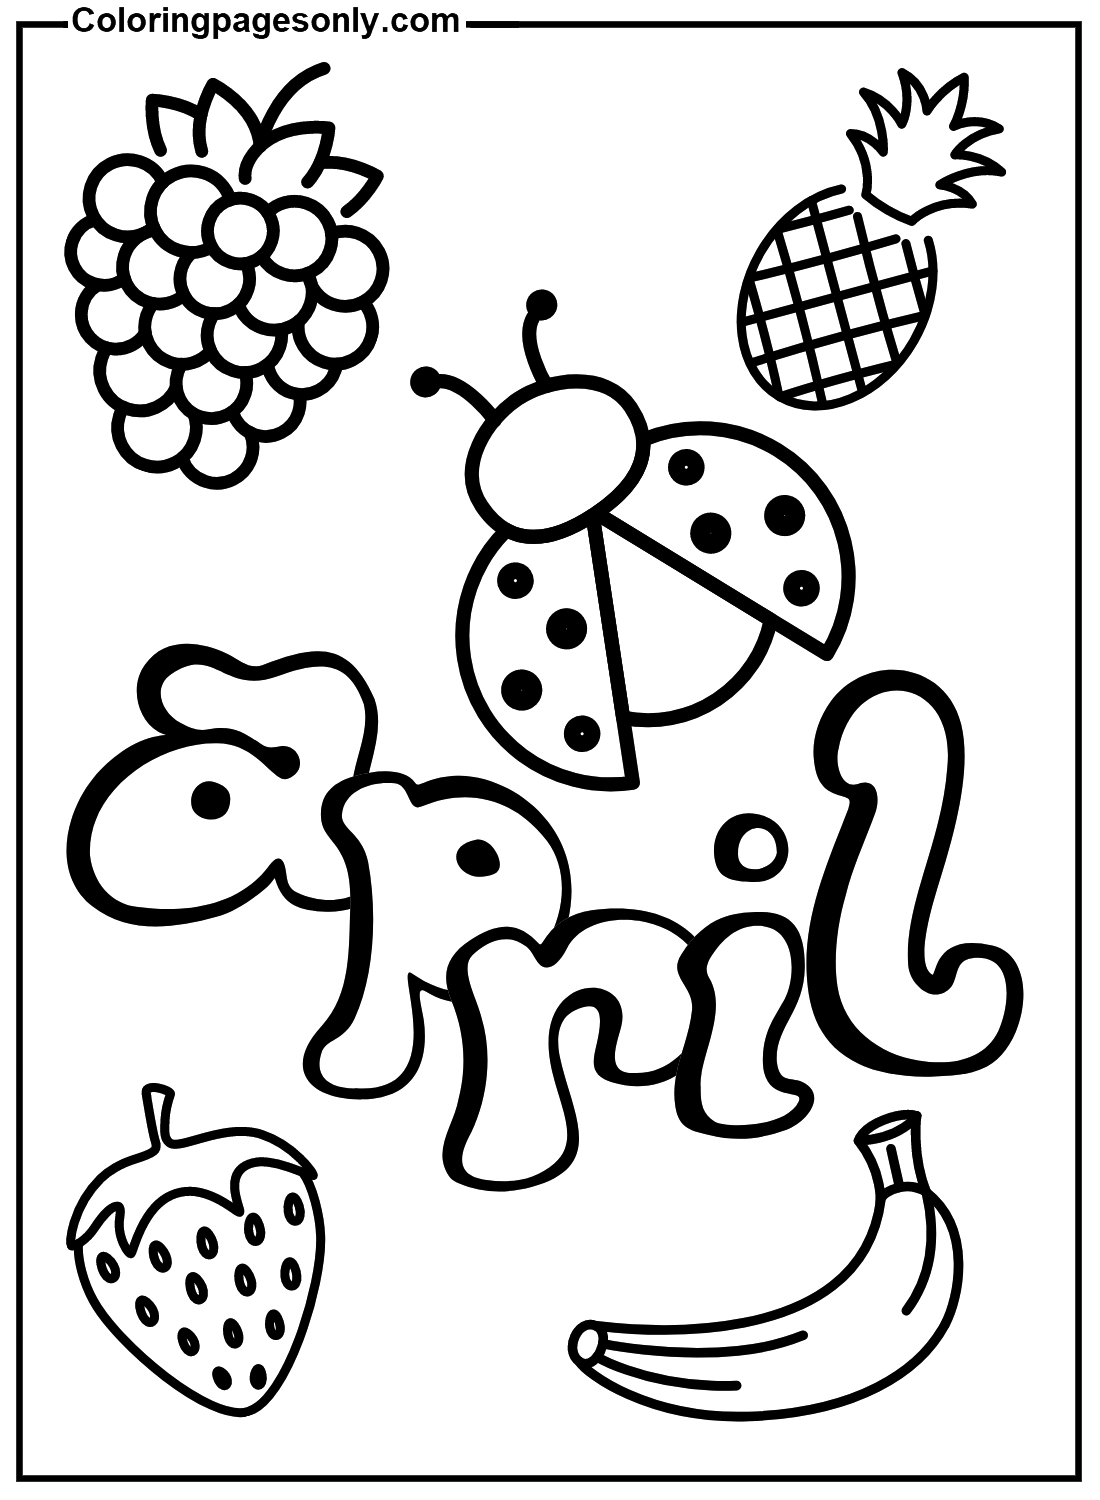 April with Fruits Coloring Page